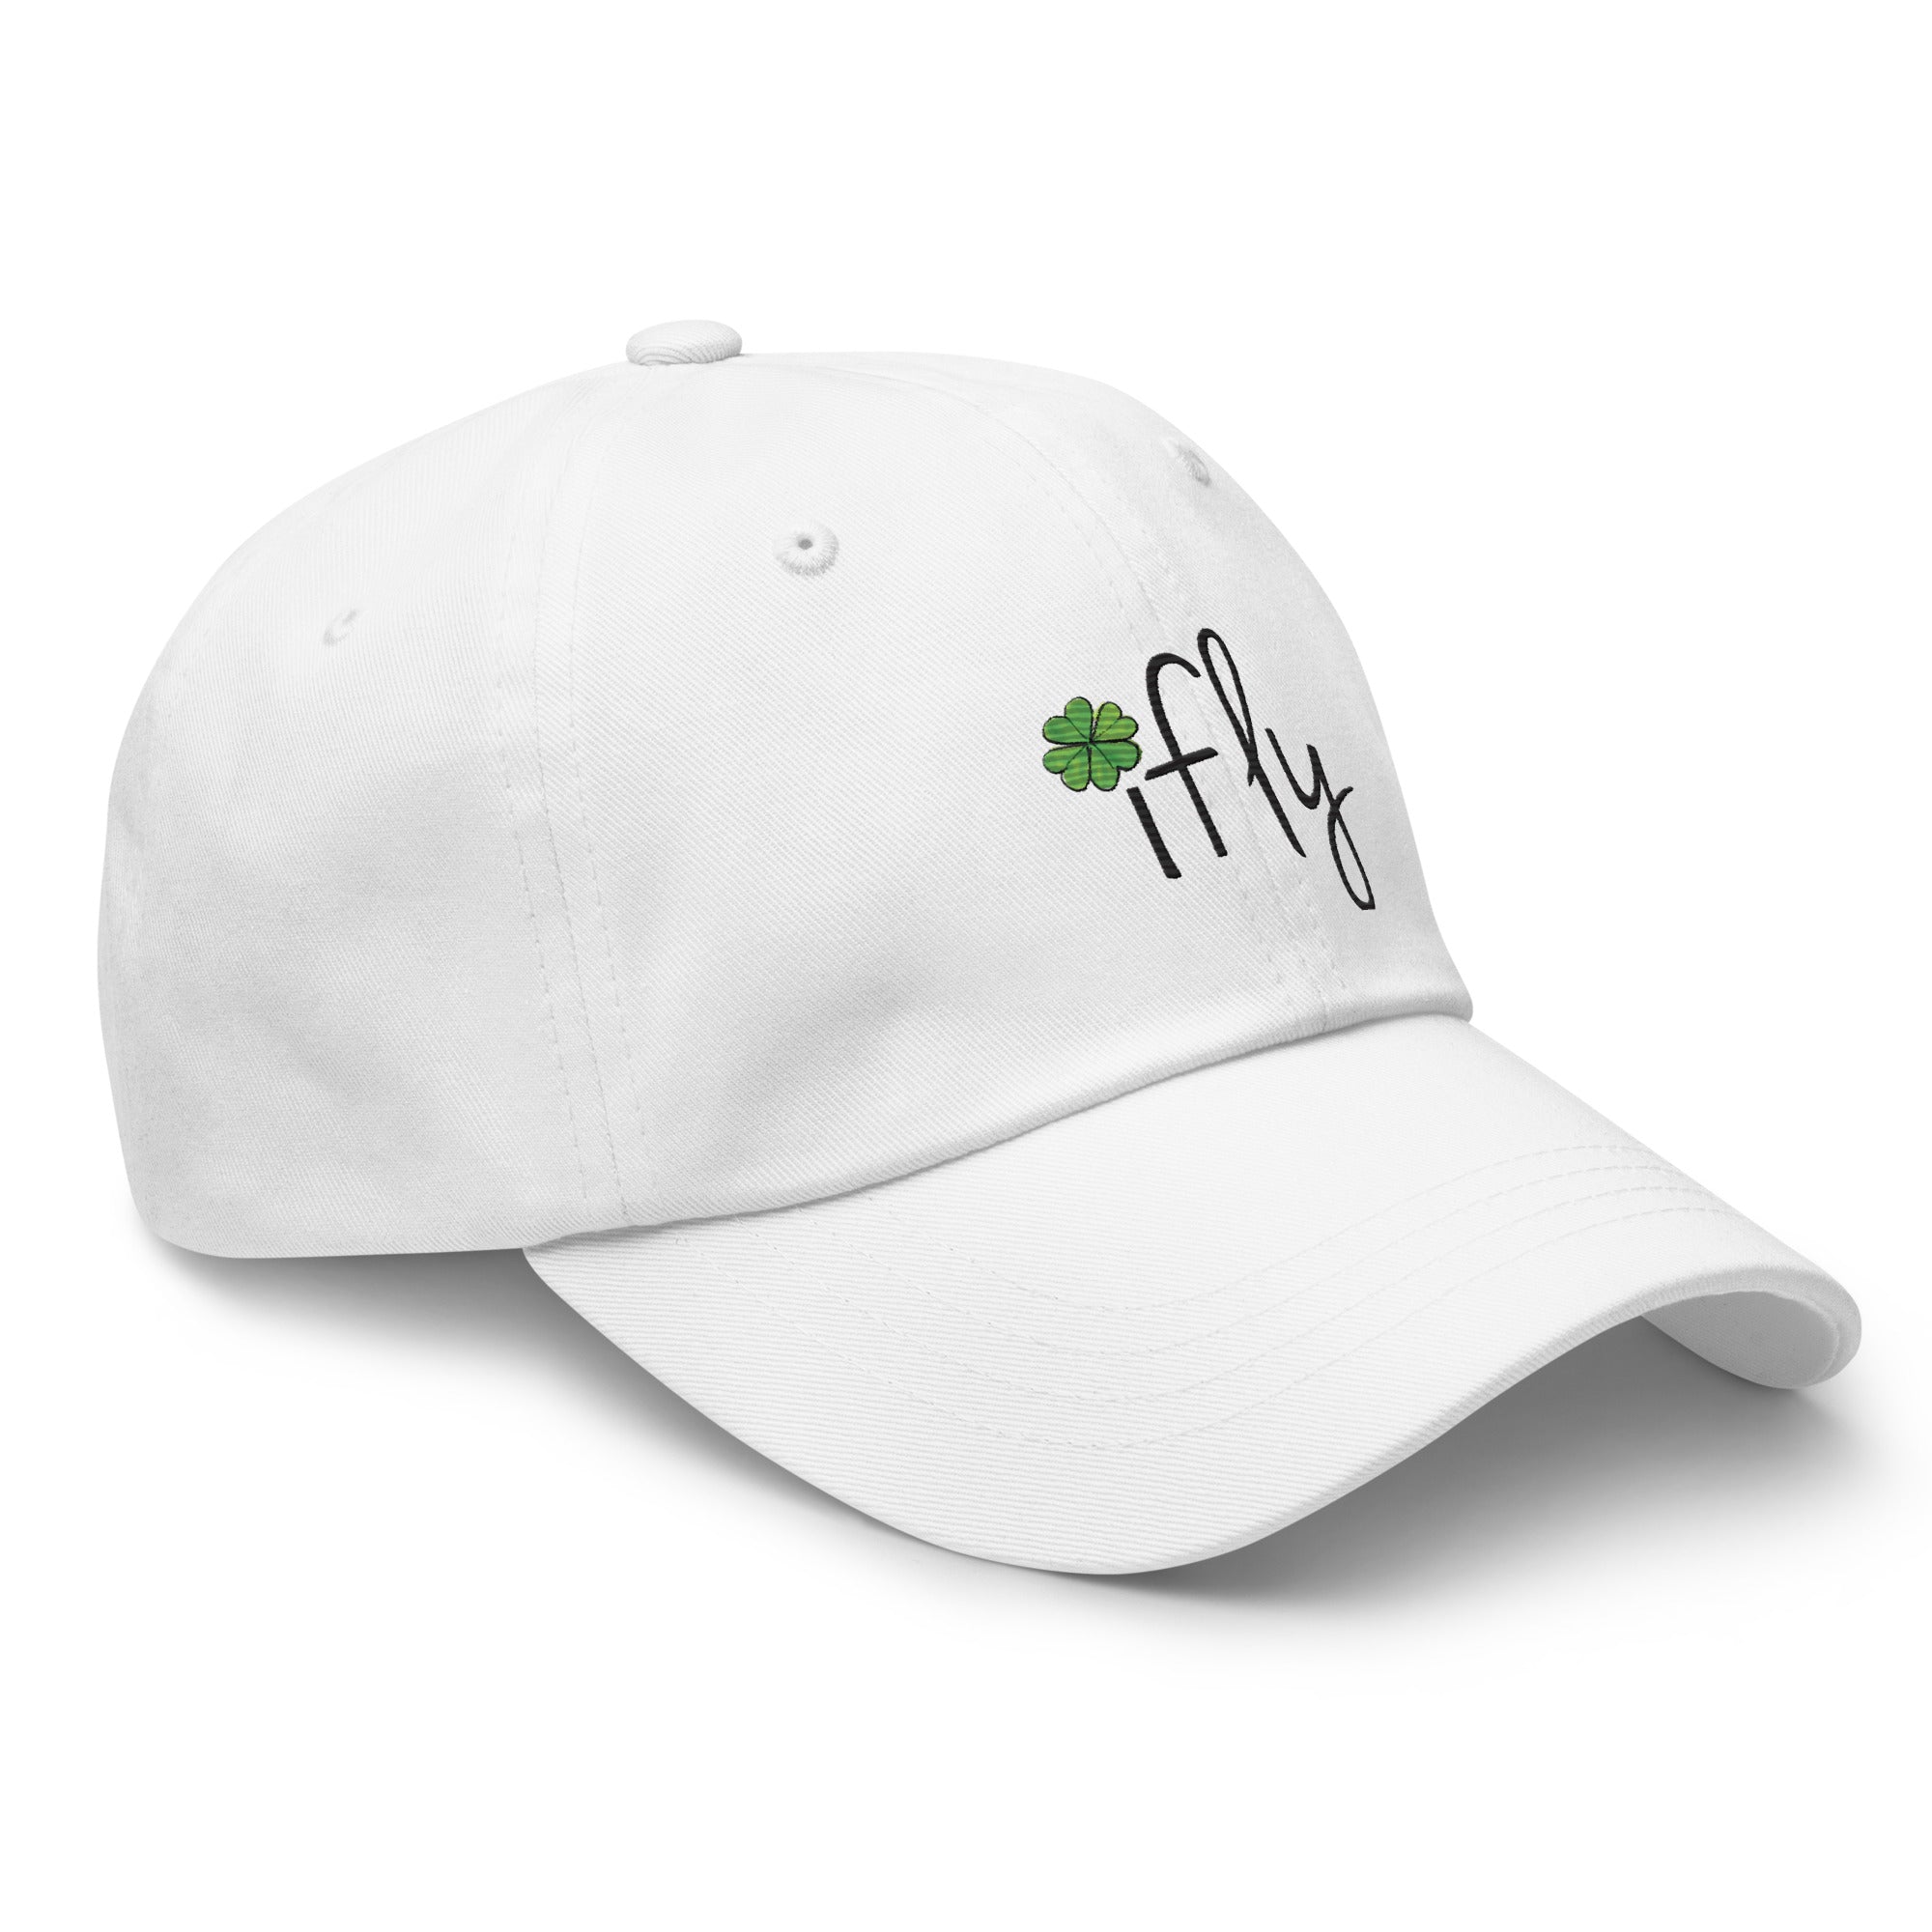 Ifly Hat